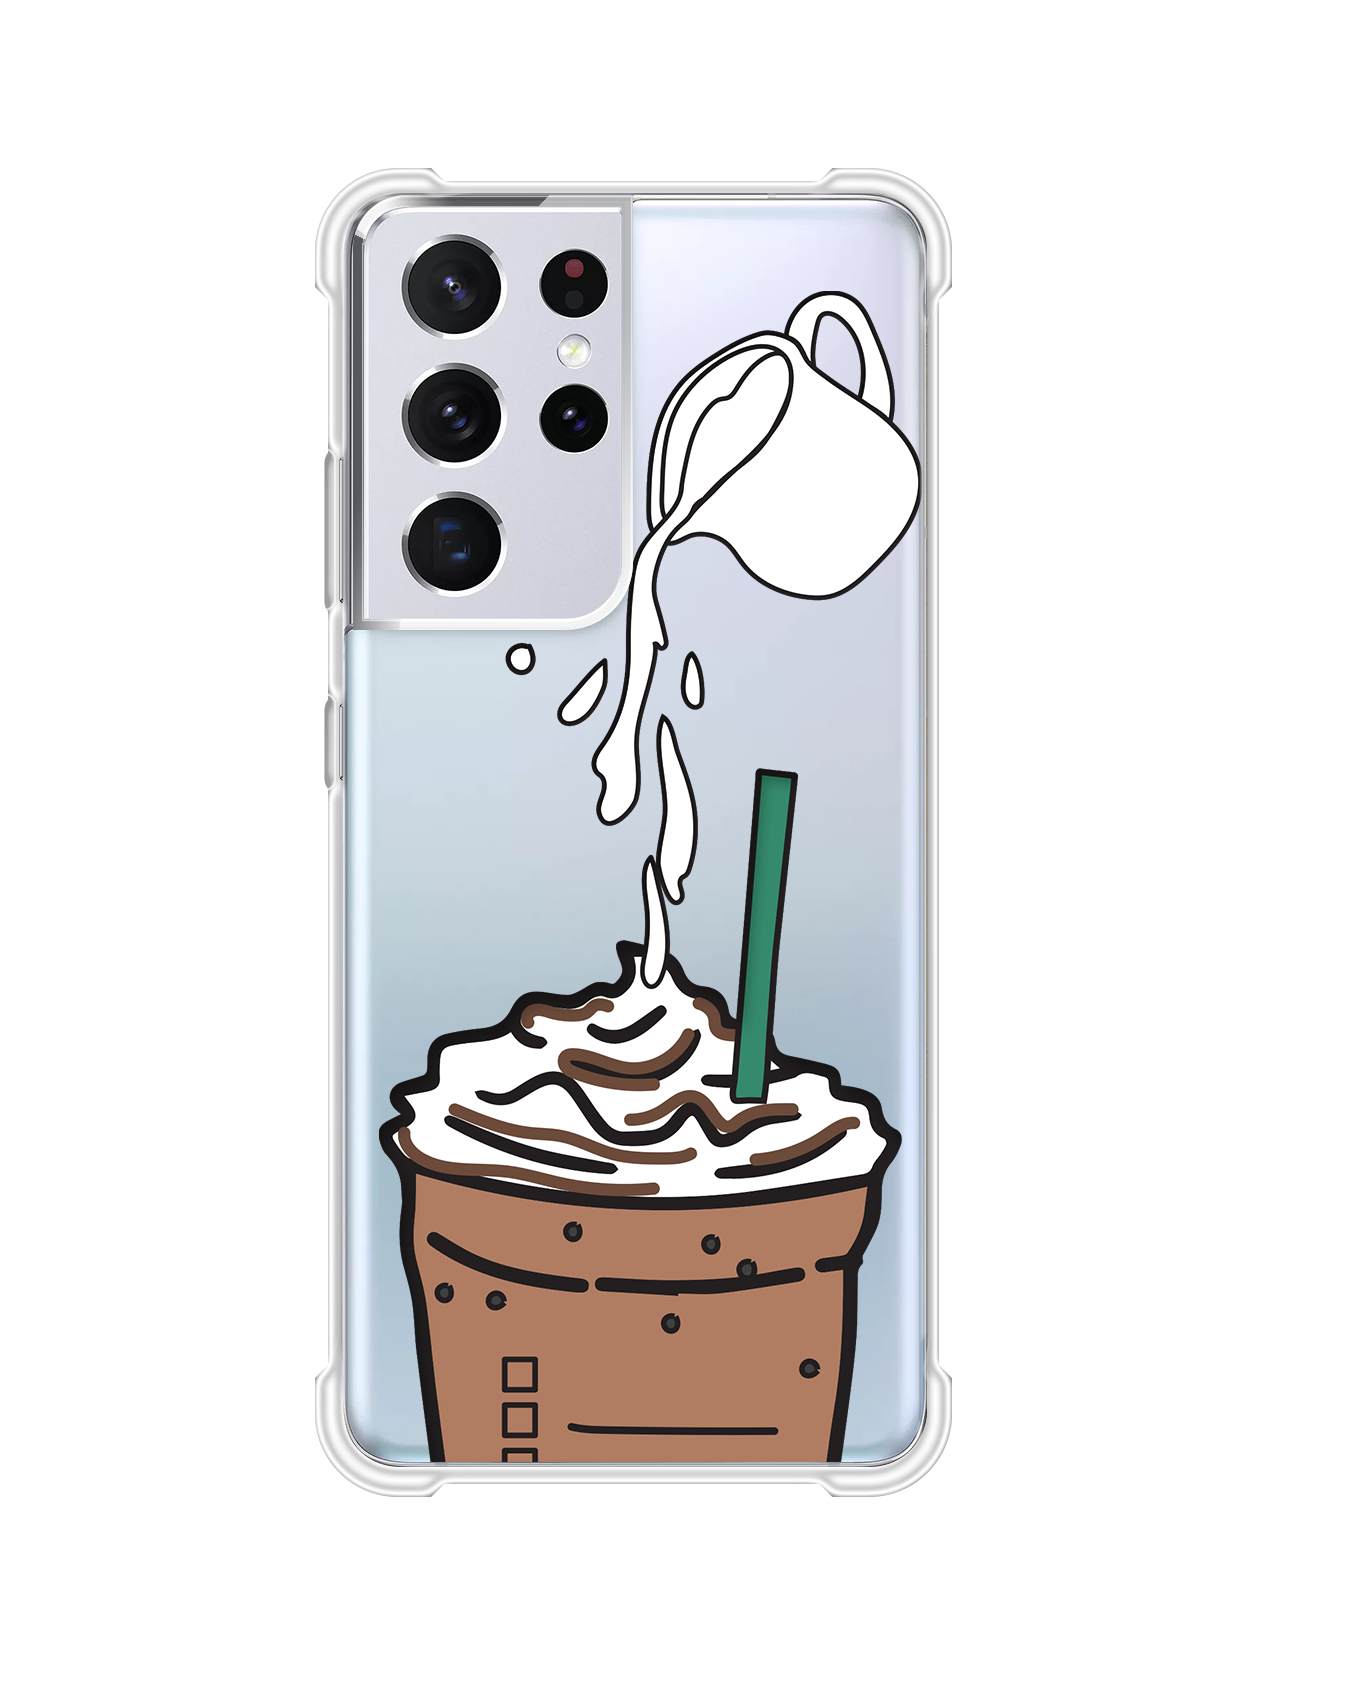 Android - Coffee Frappe